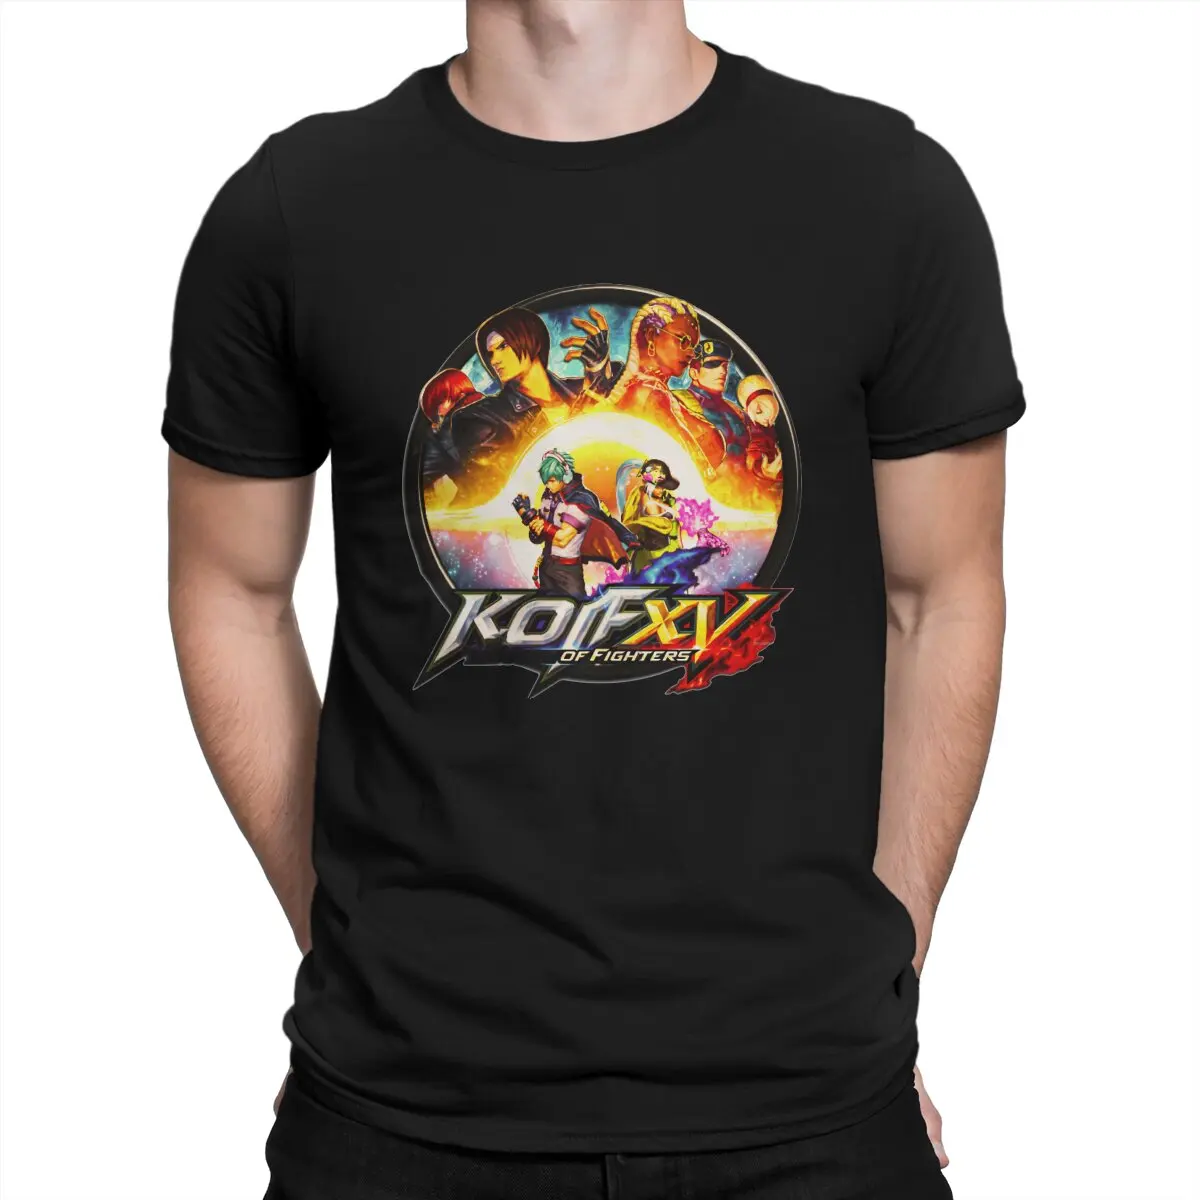 

Men Xv Essential T Shirt The King of Fighters Game Cotton Clothing Novelty Short Sleeve Round Collar Tee Shirt Summer T-Shirts